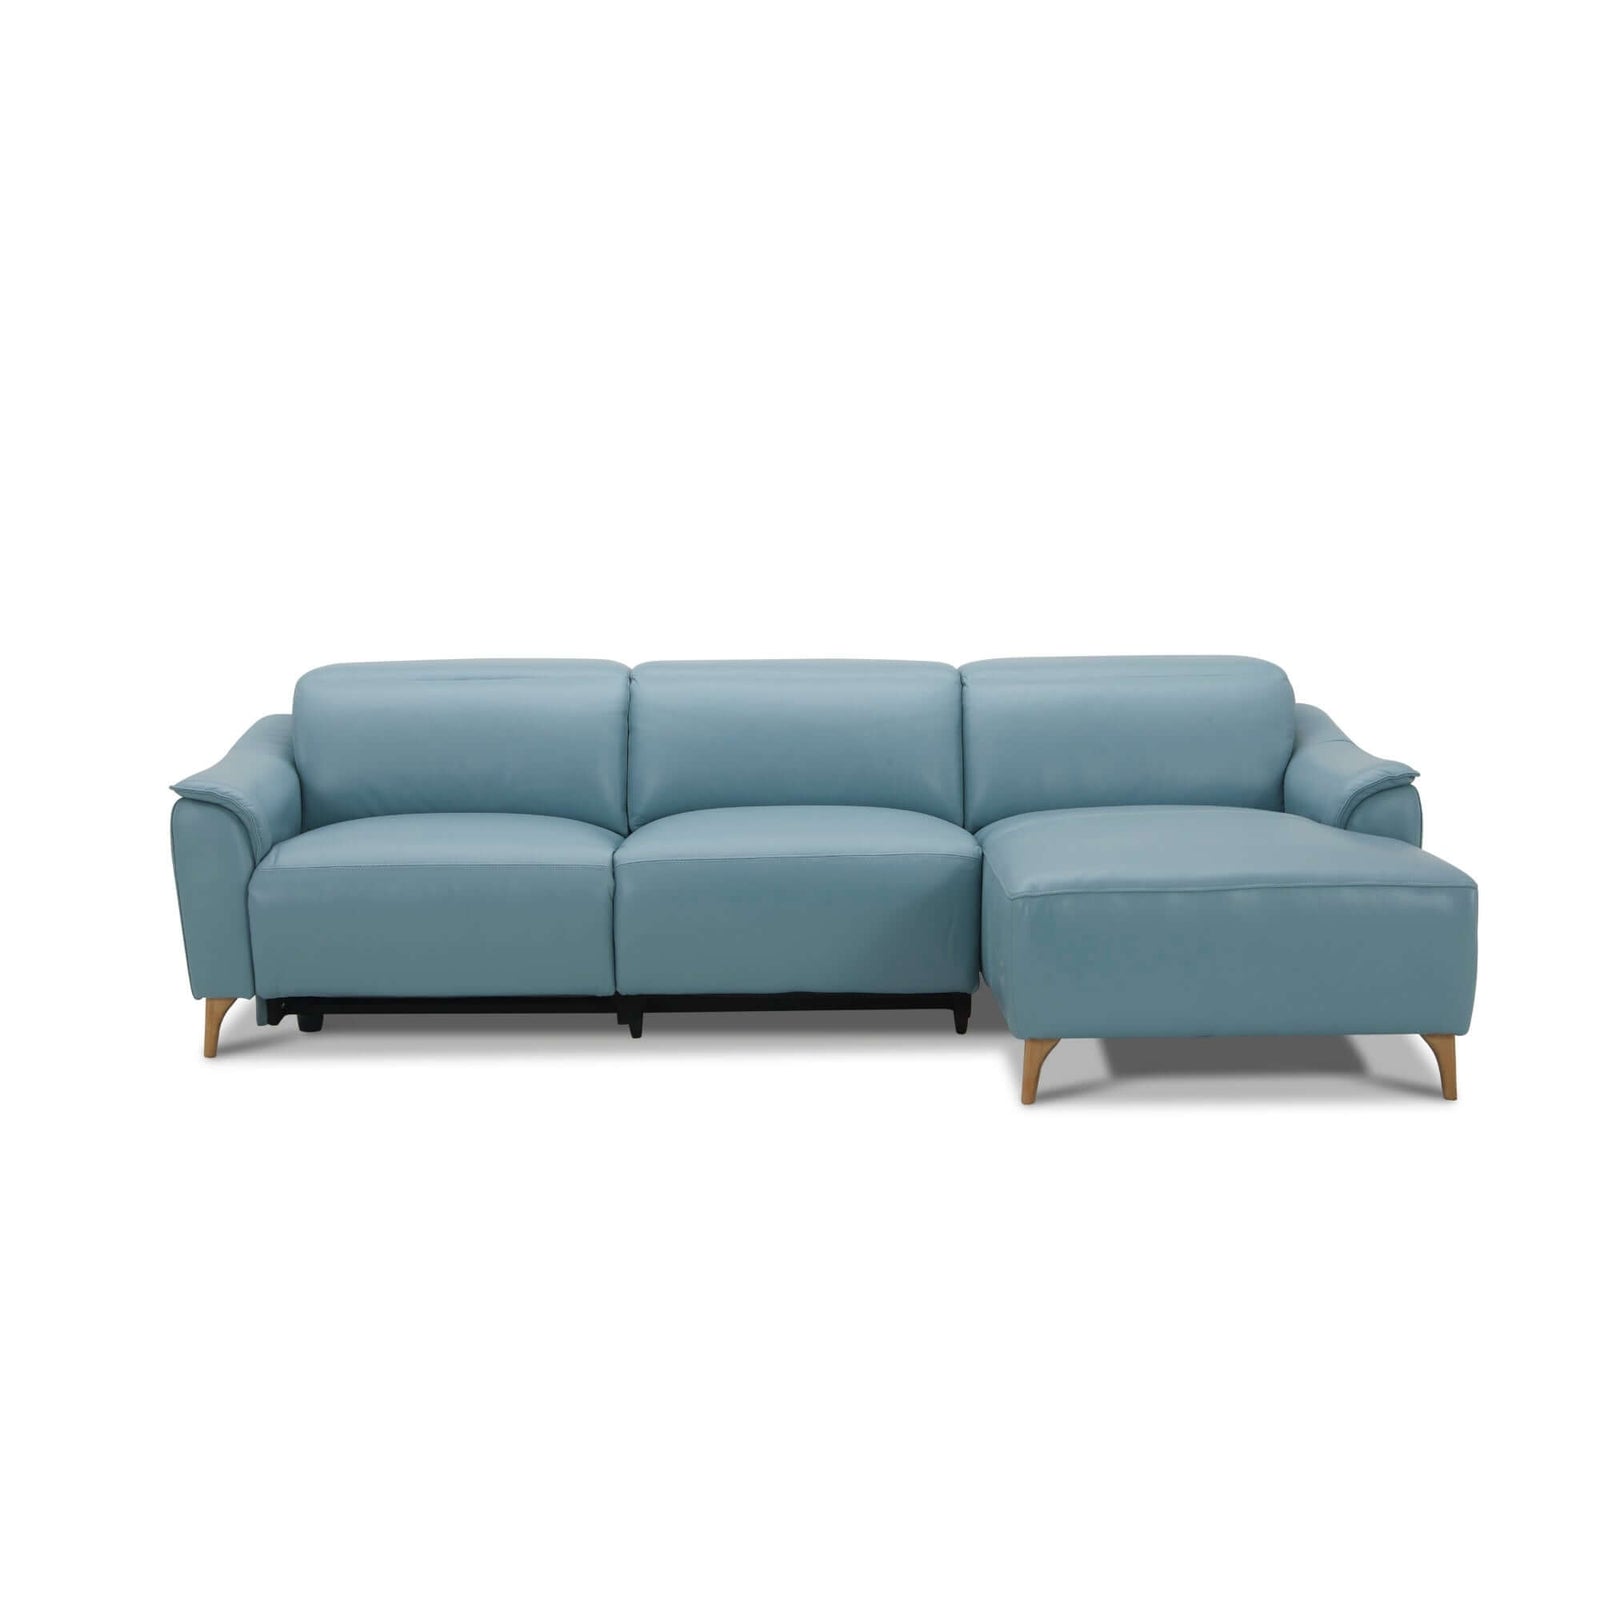 Inala 2 Seater Genuine Leather Sofa Lounge Electric Powered Recliner RHF Chaise Blue-Upinteriors